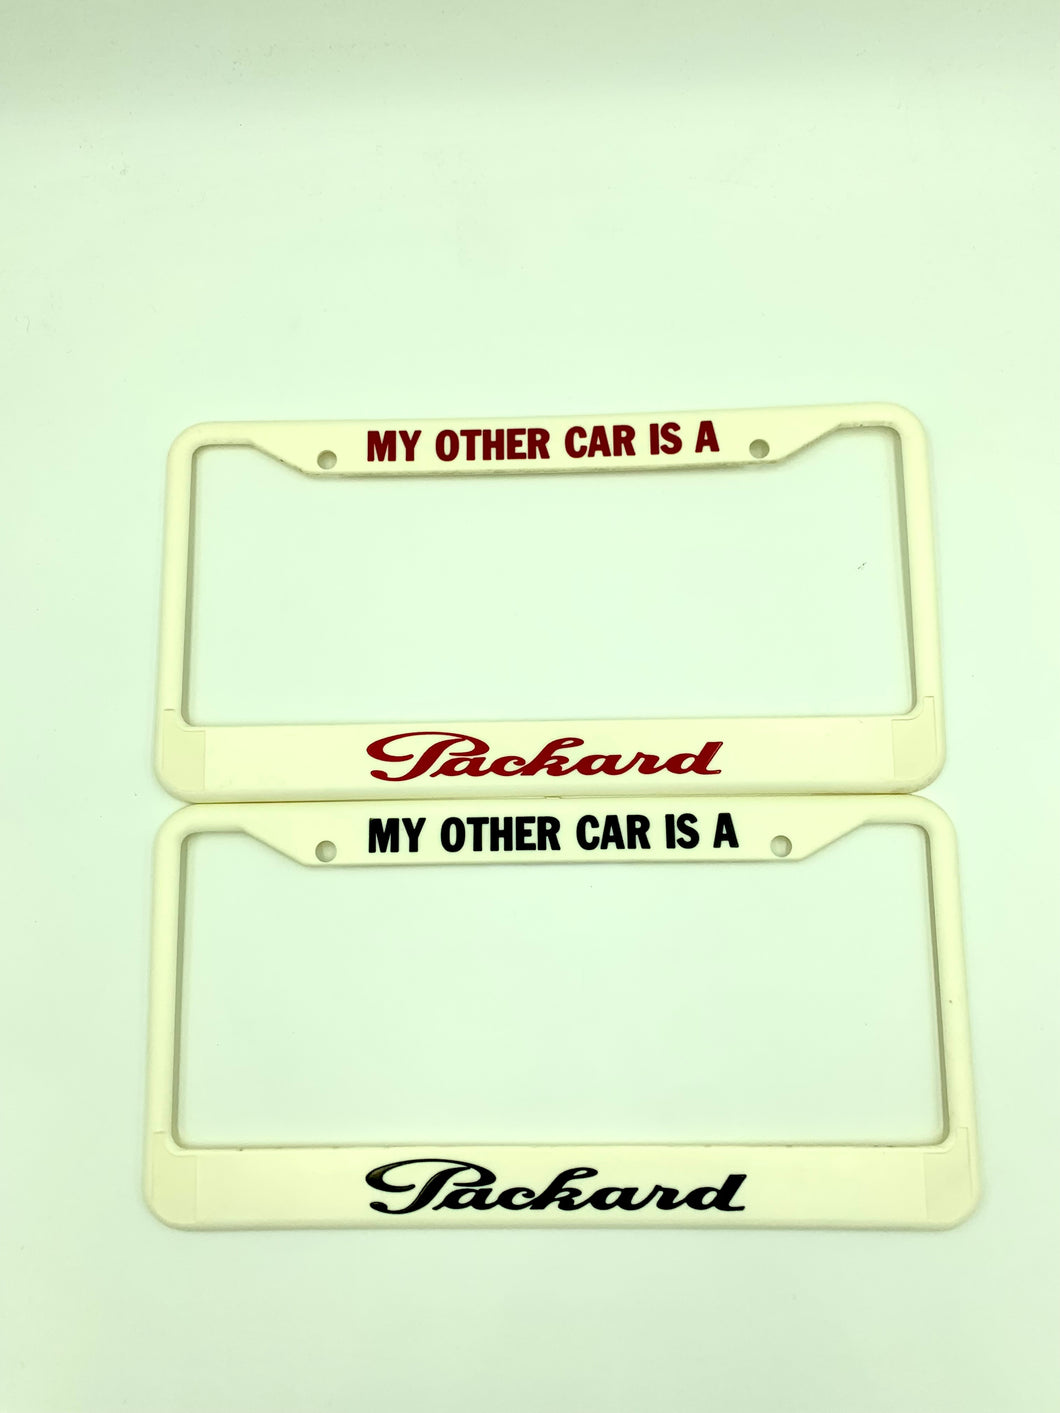 License Plate Cover - My Other Car is a Packard $5.00